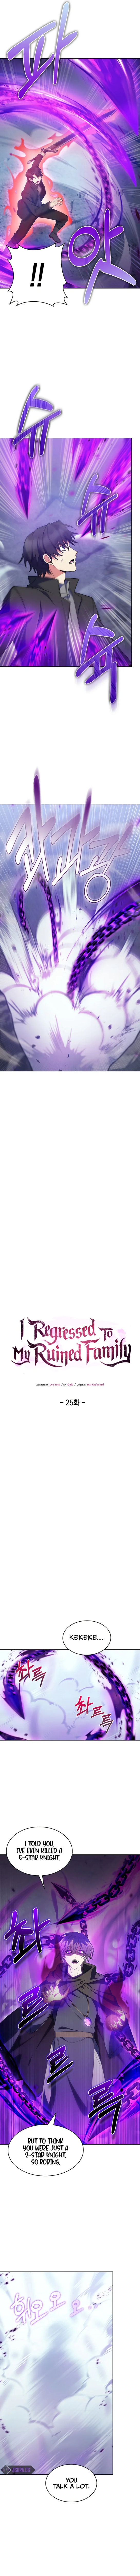 I Regressed to My Ruined Family - Chapter 25 Page 3